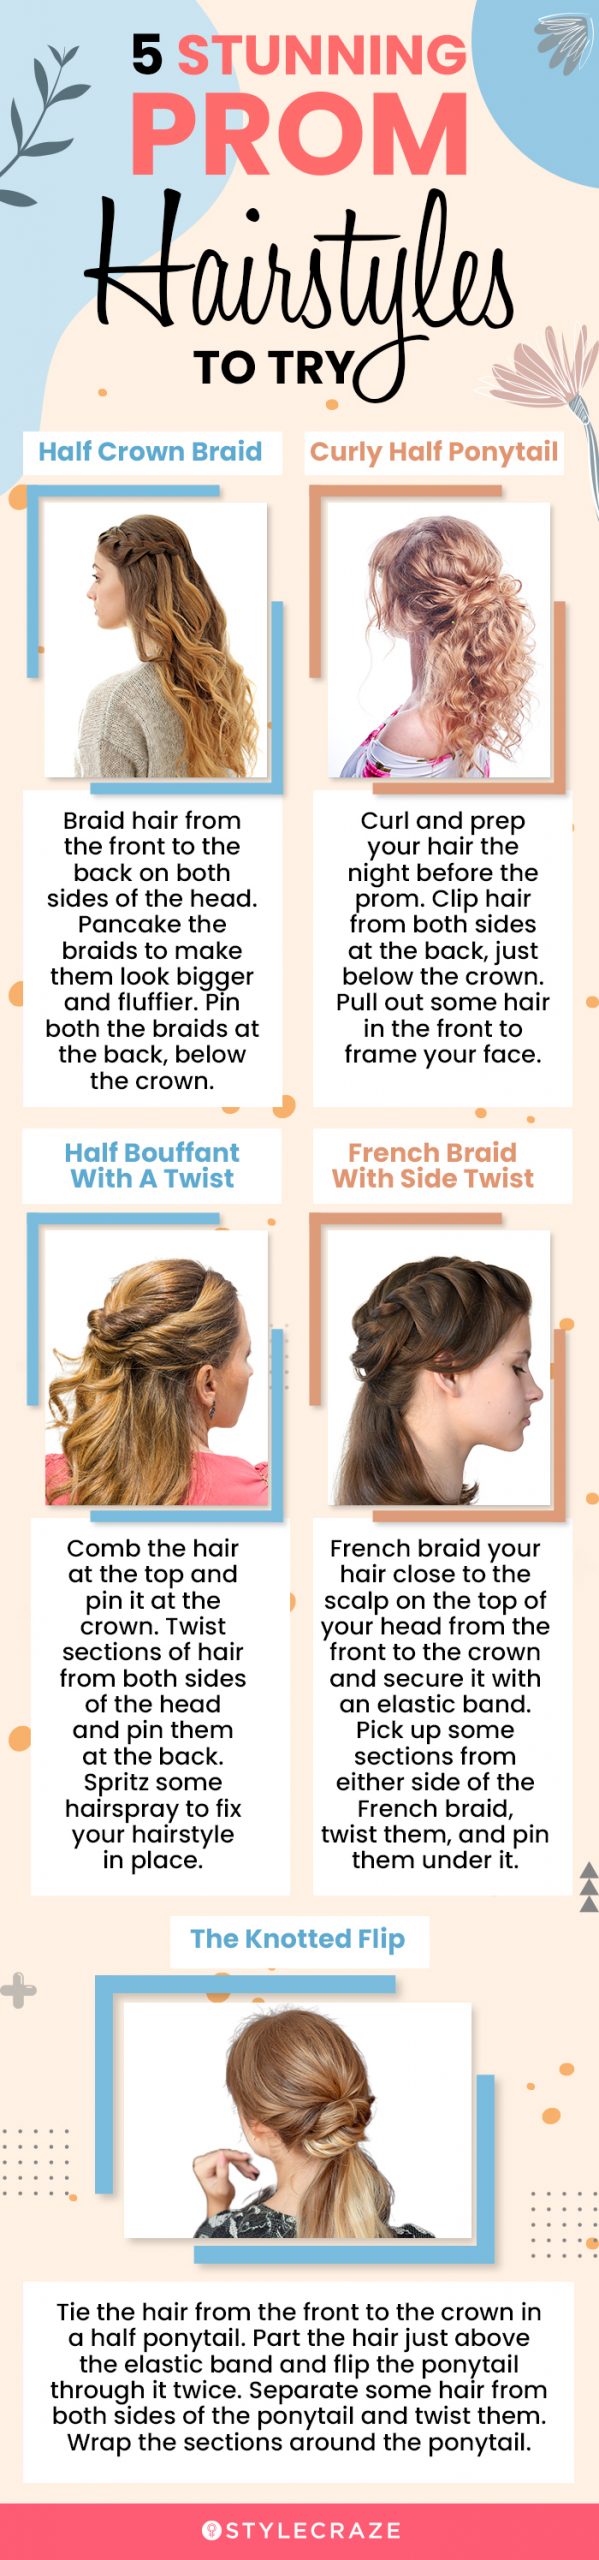 Homecoming hairstyles all your friends will swoon over